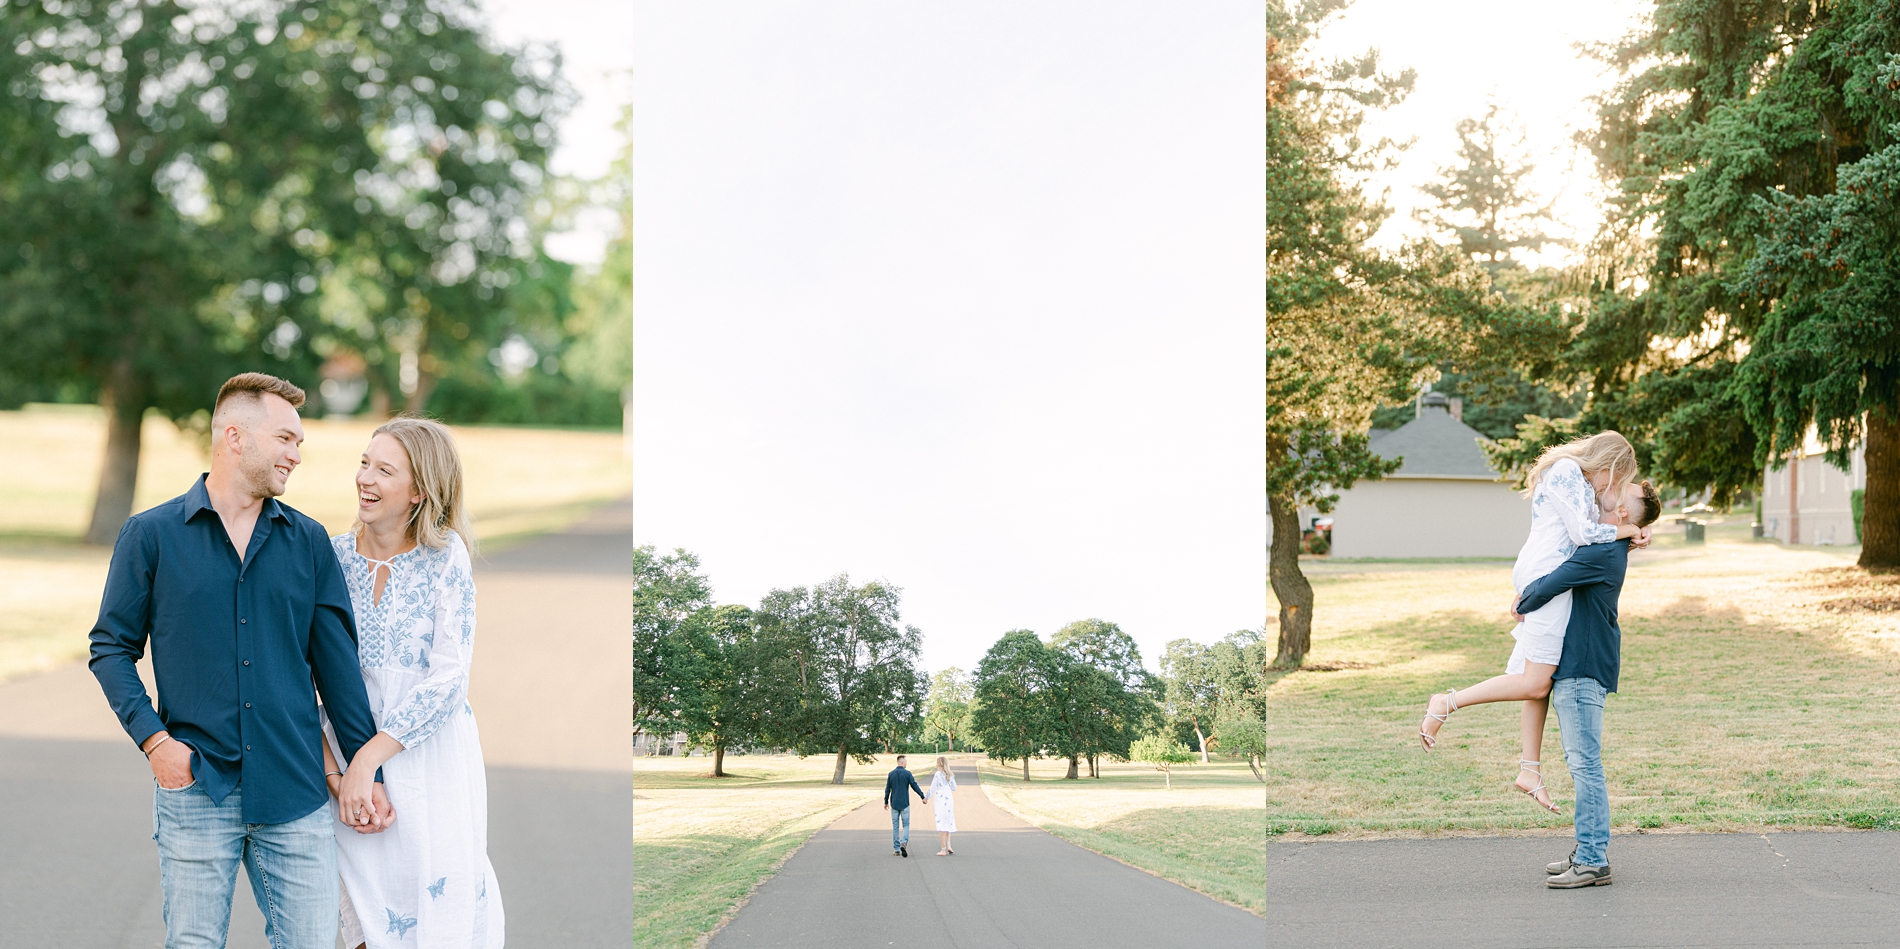 Vancouver, Washington Engagement Session by Natalie Kysar Photography